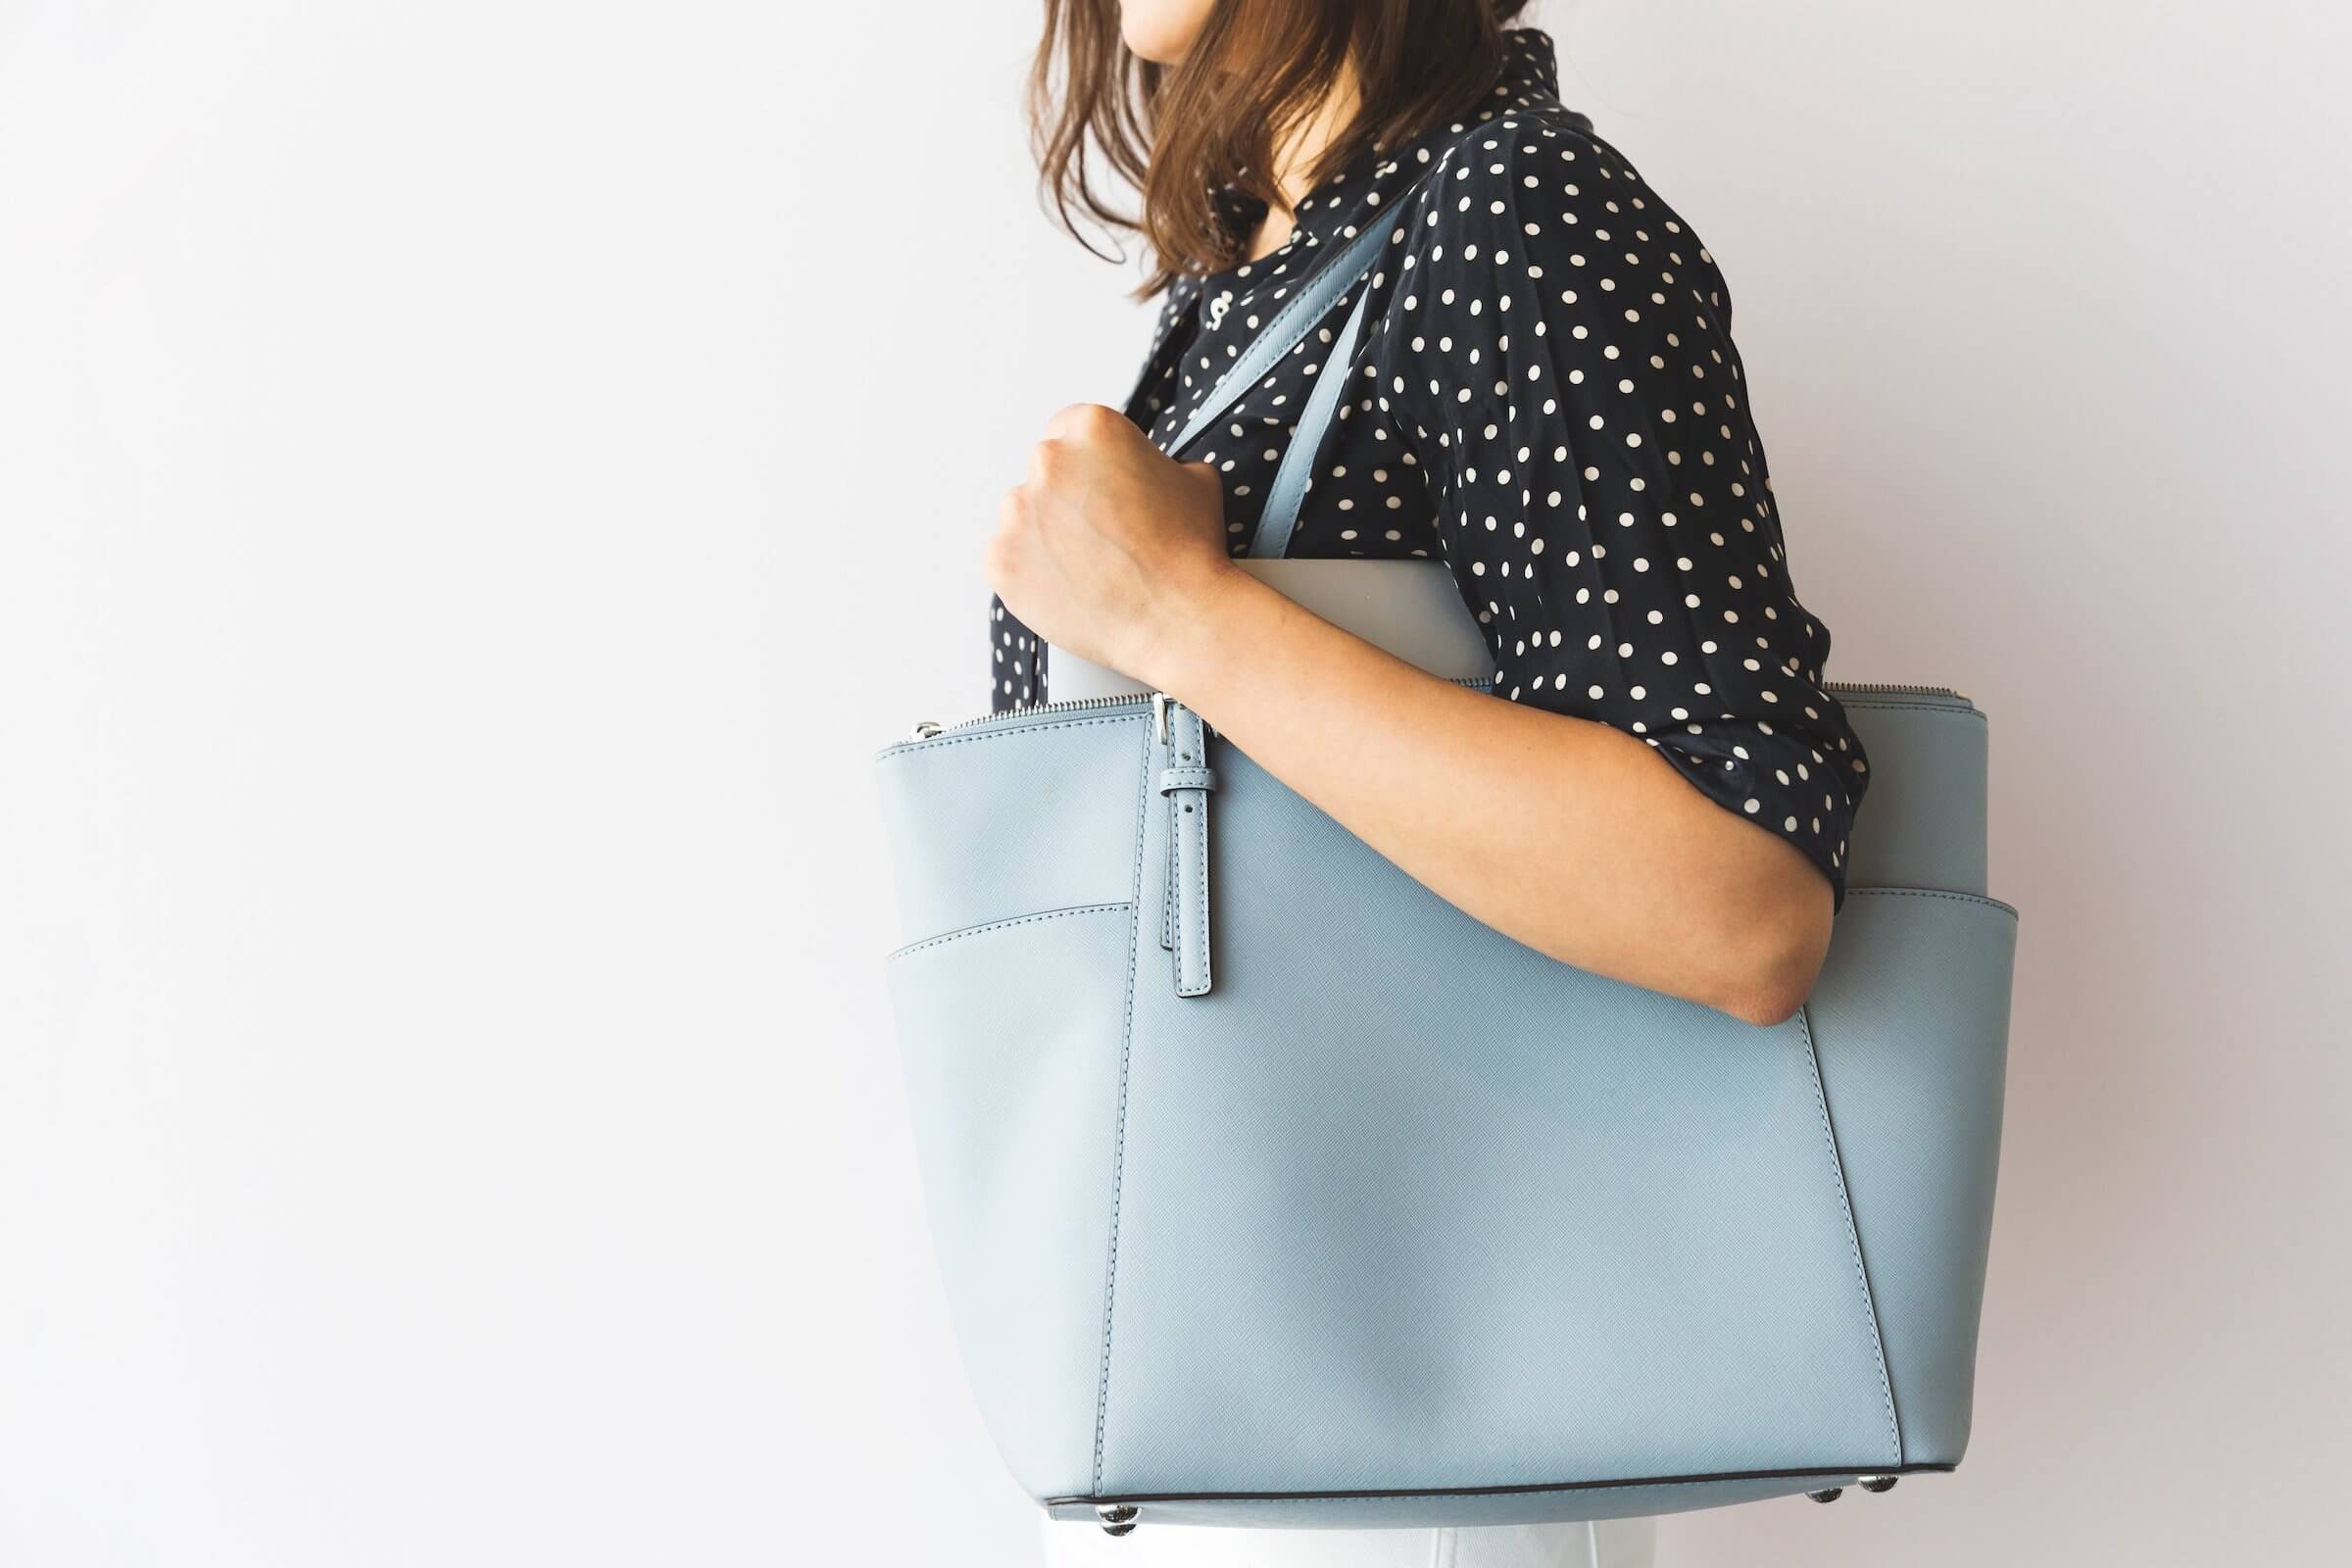 woman holding handbag who has decided what to take to an interview